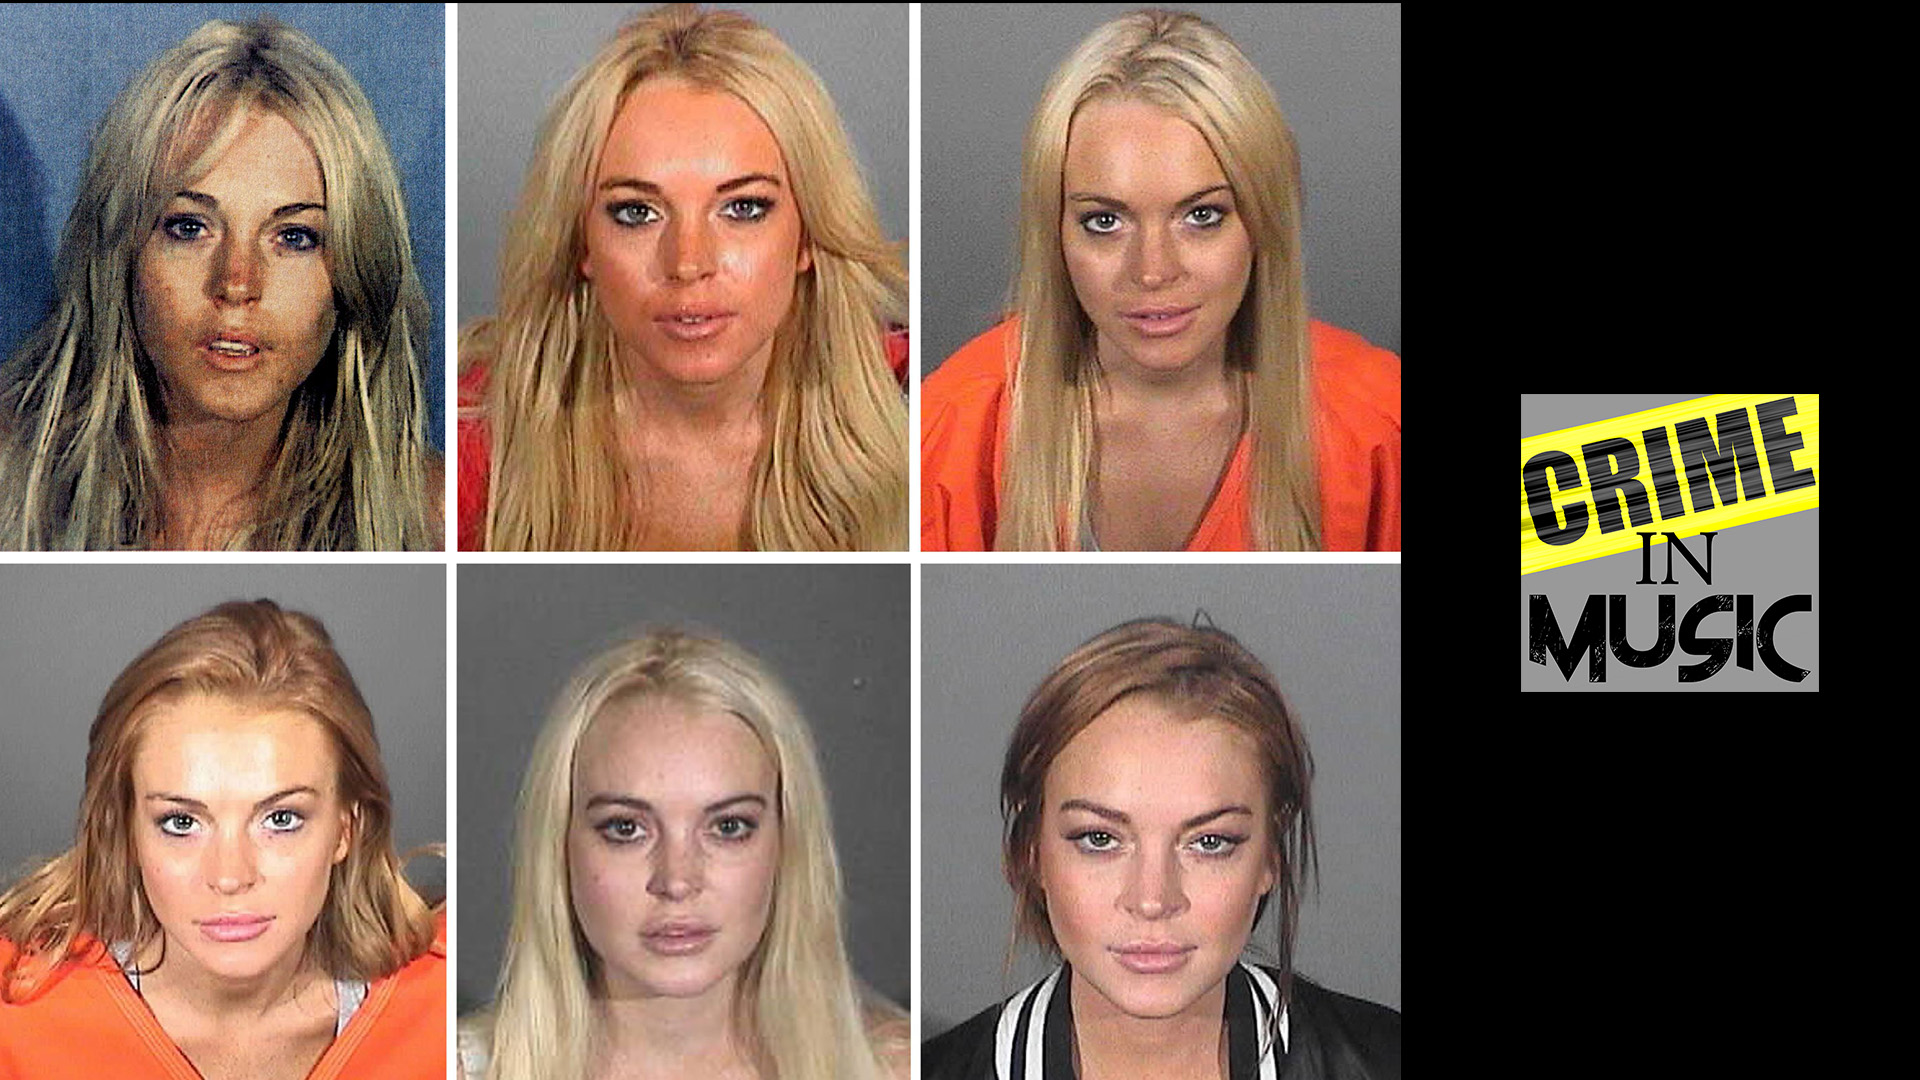 photo collage of Lindsay Lohan, Actor, Musician, pop music, EDM